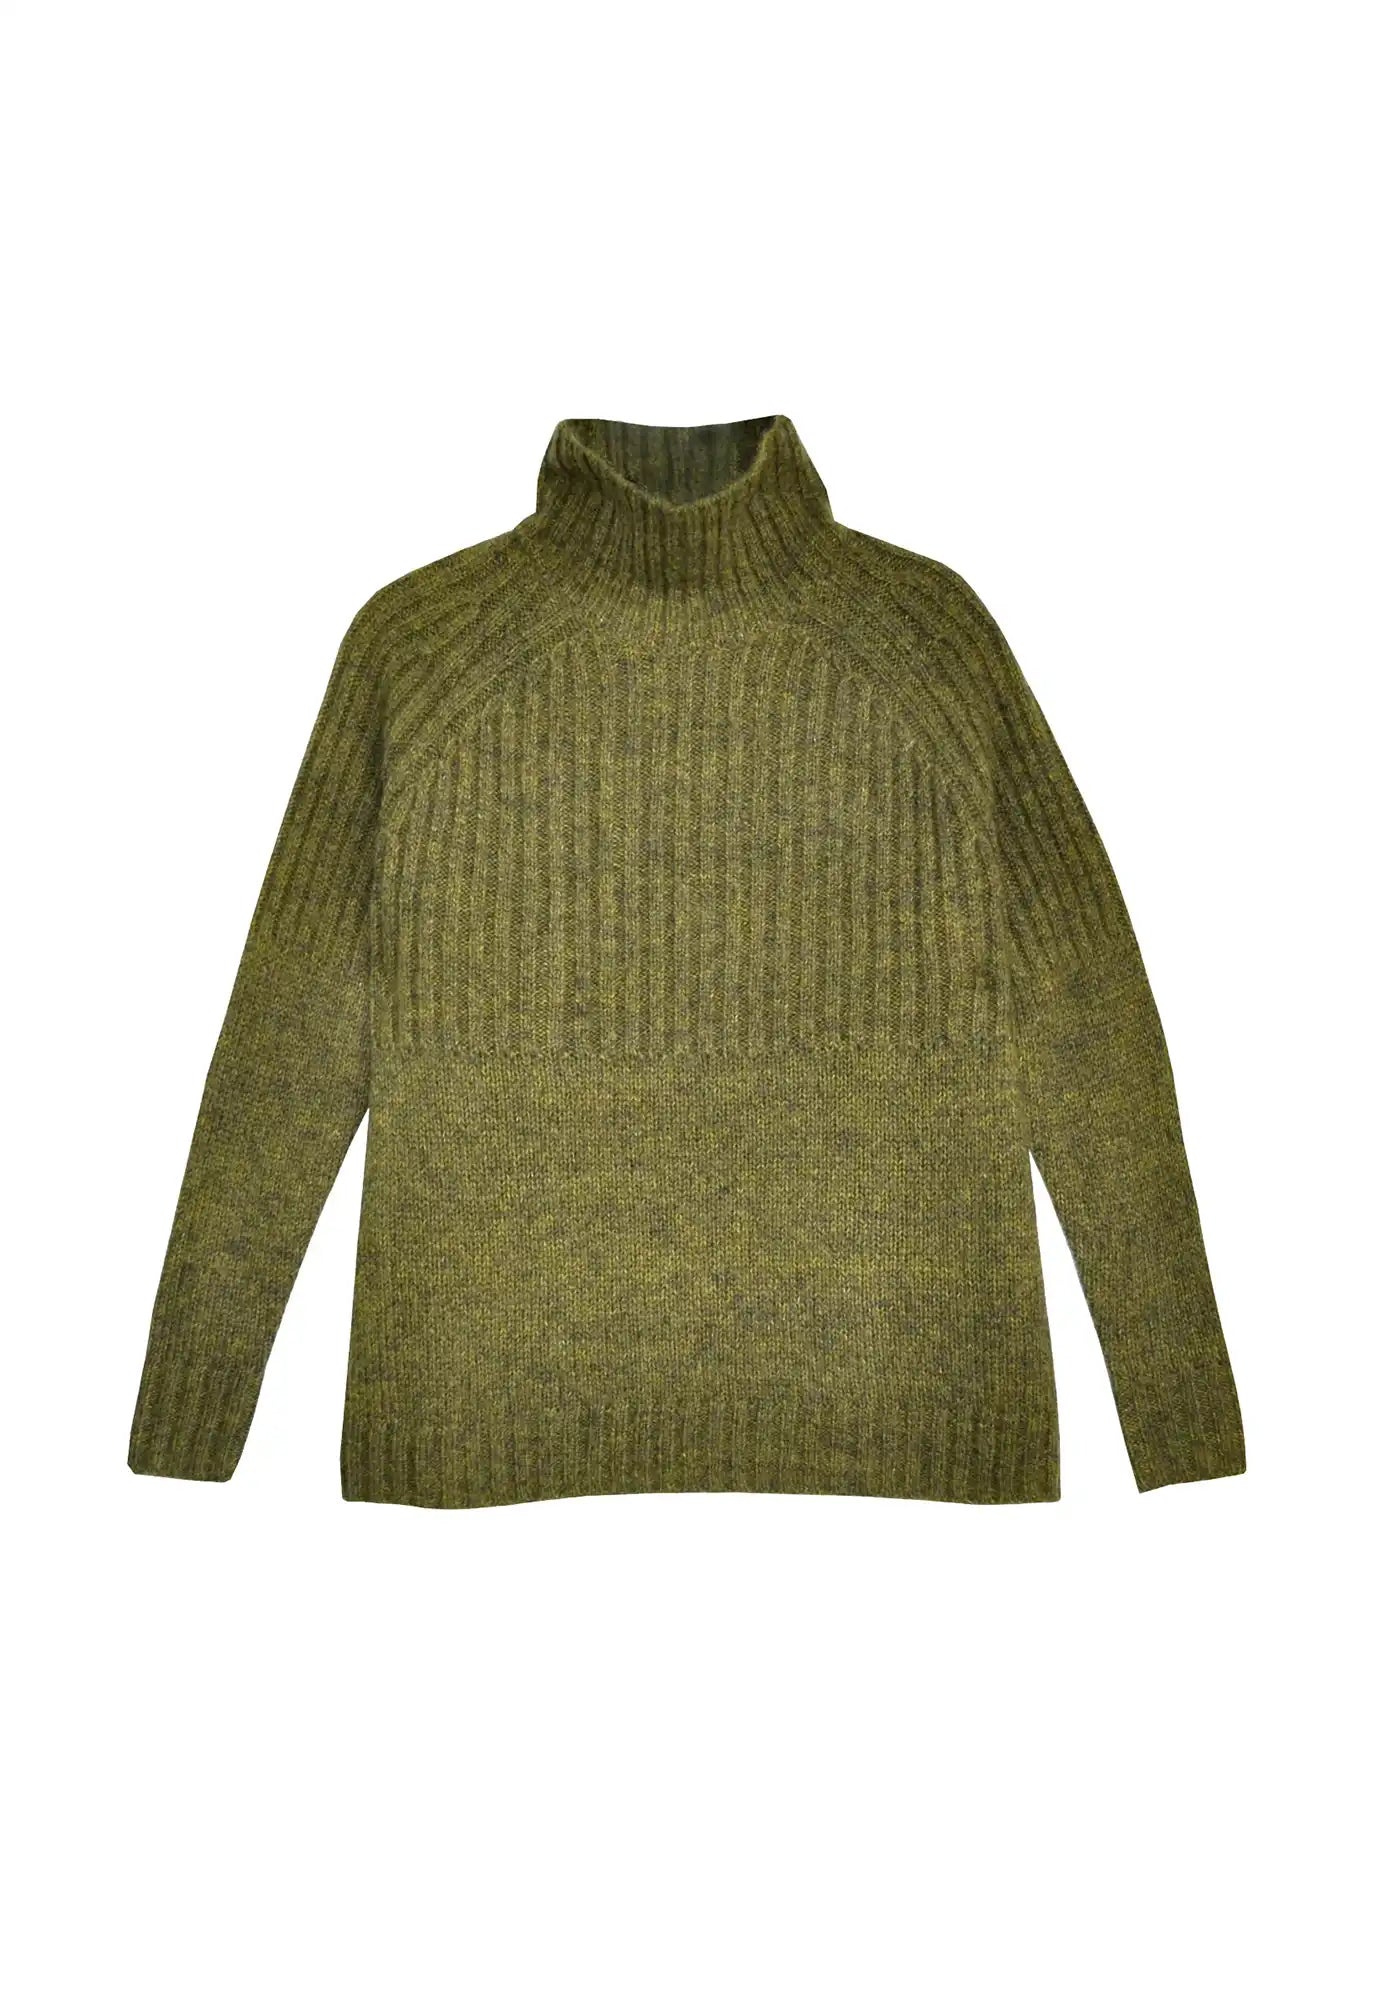 pol - surrey ribbed detail knit - forest